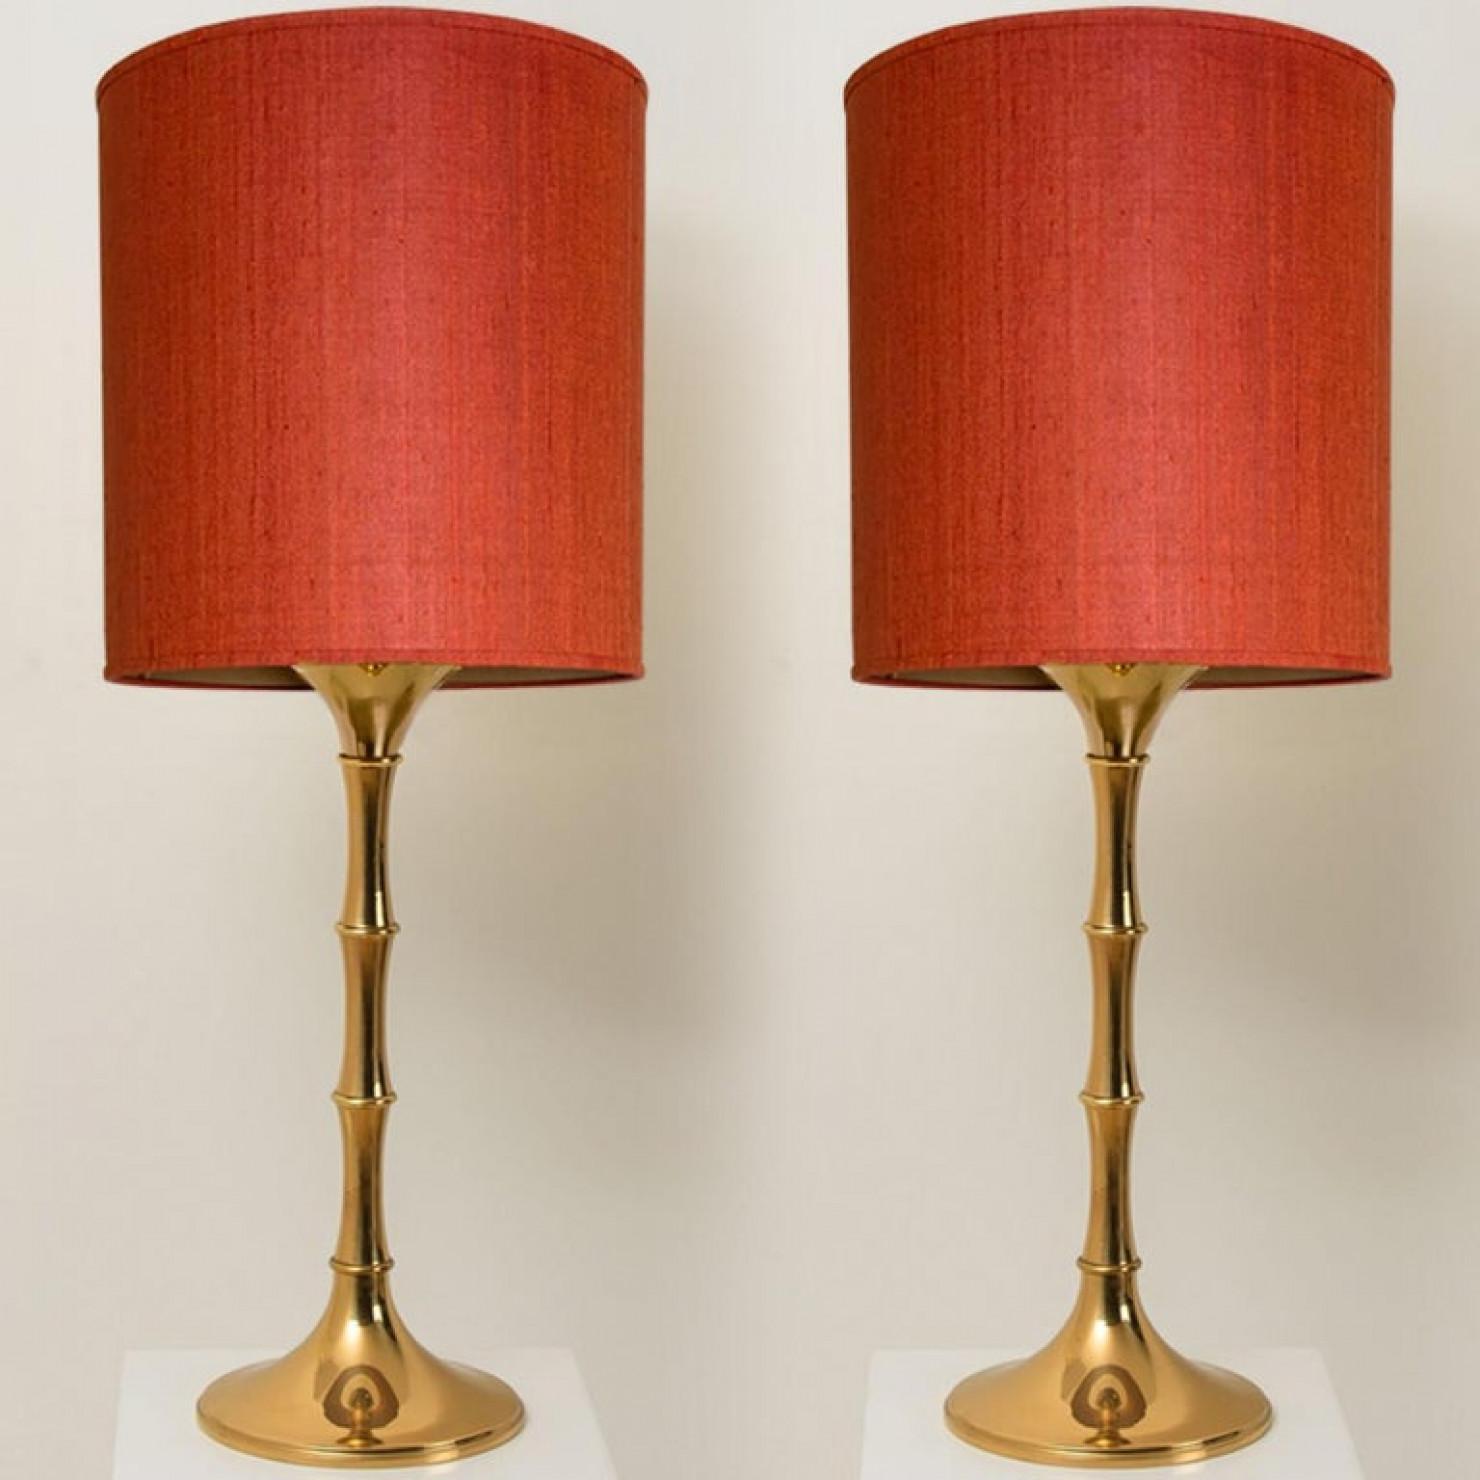 Mid-Century Modern Pair of Table and Floor Lamp Designed by Ingo Maurer, 1968 For Sale